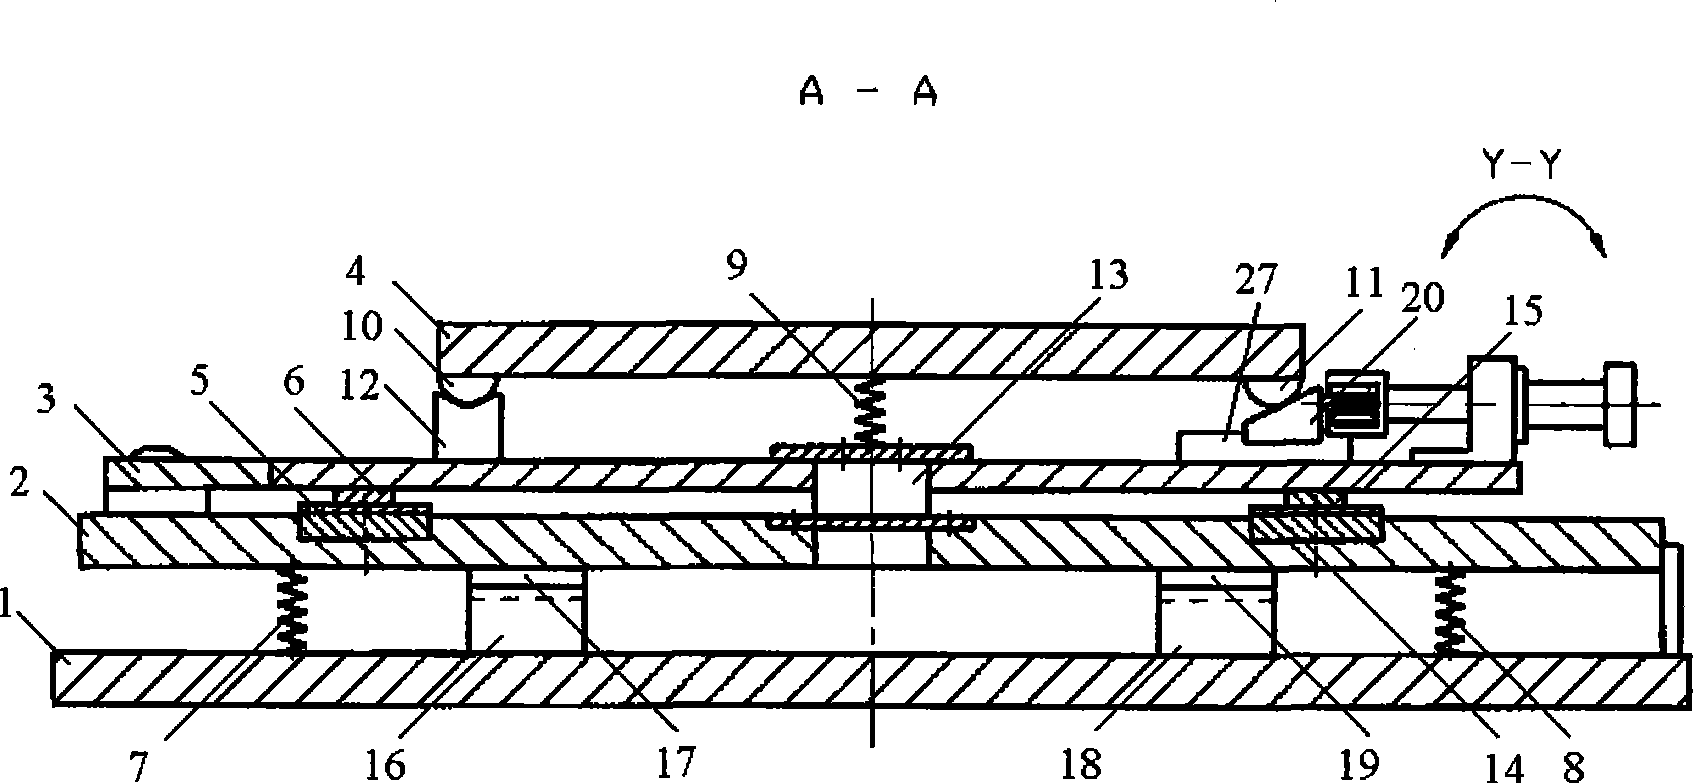 Accurate one-dimensional rotary and two-dimensional tilting table